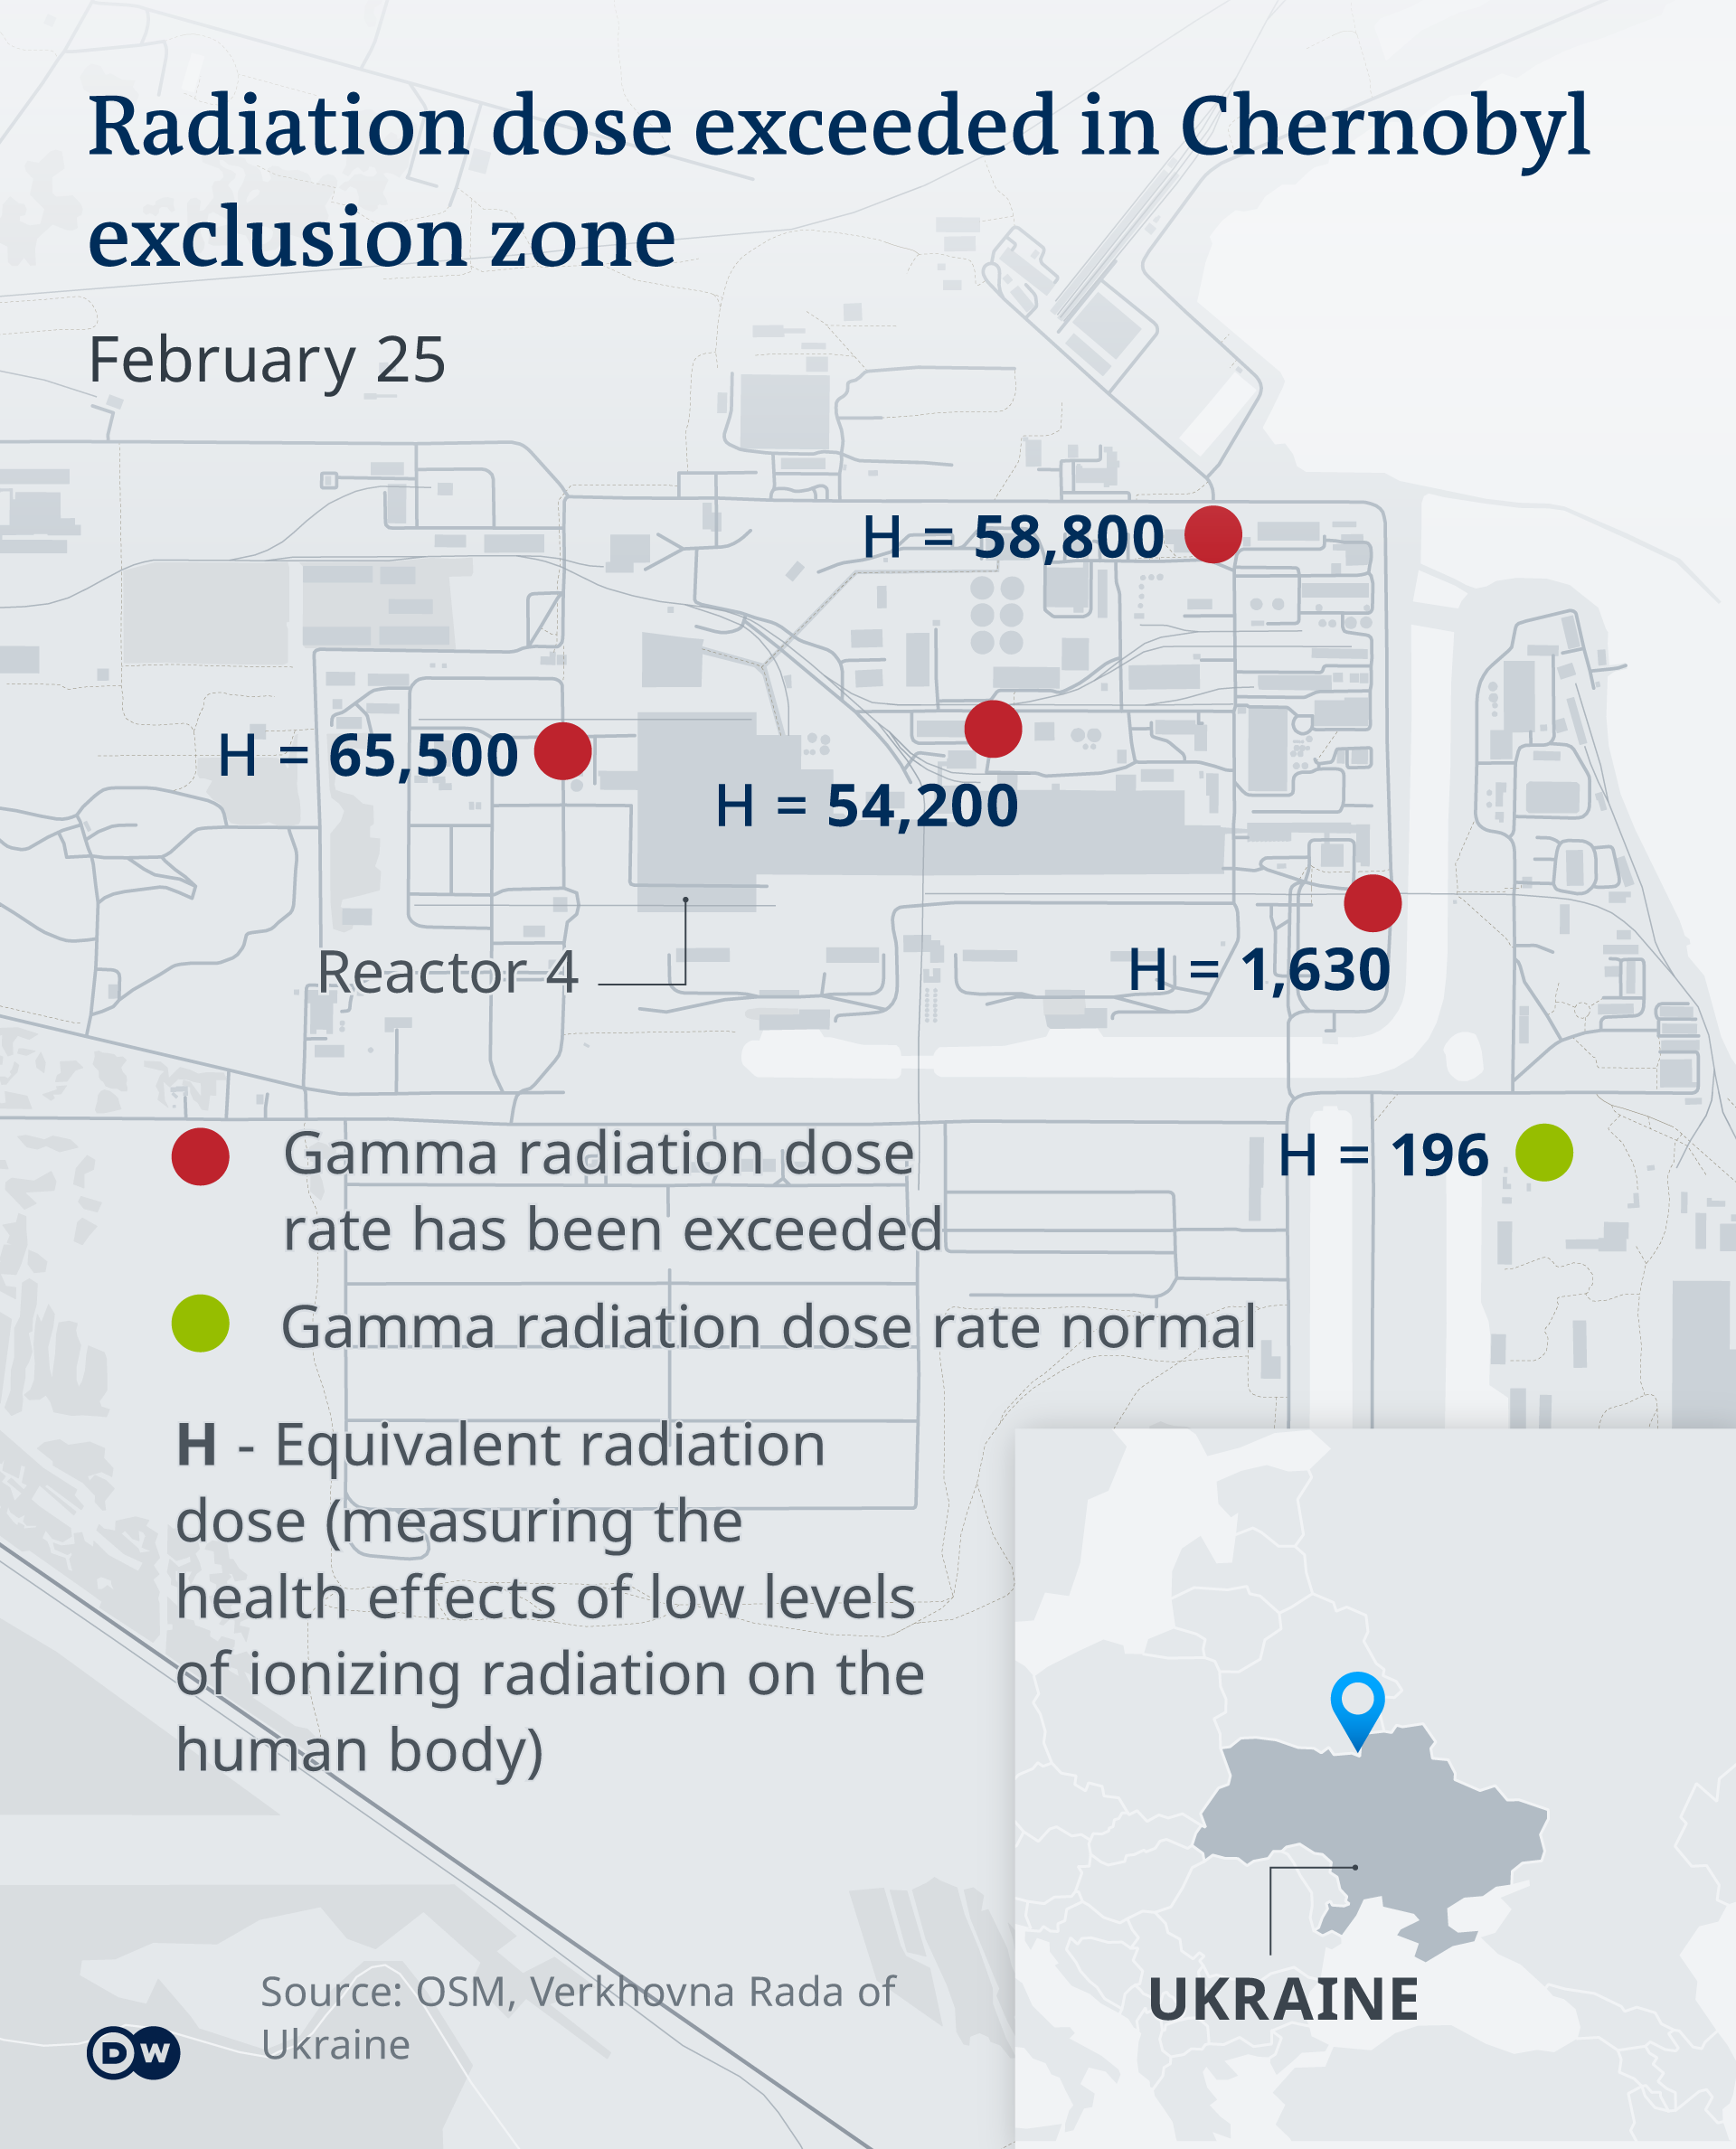 Infographic showing radiation dose exceeded in Chernobyl